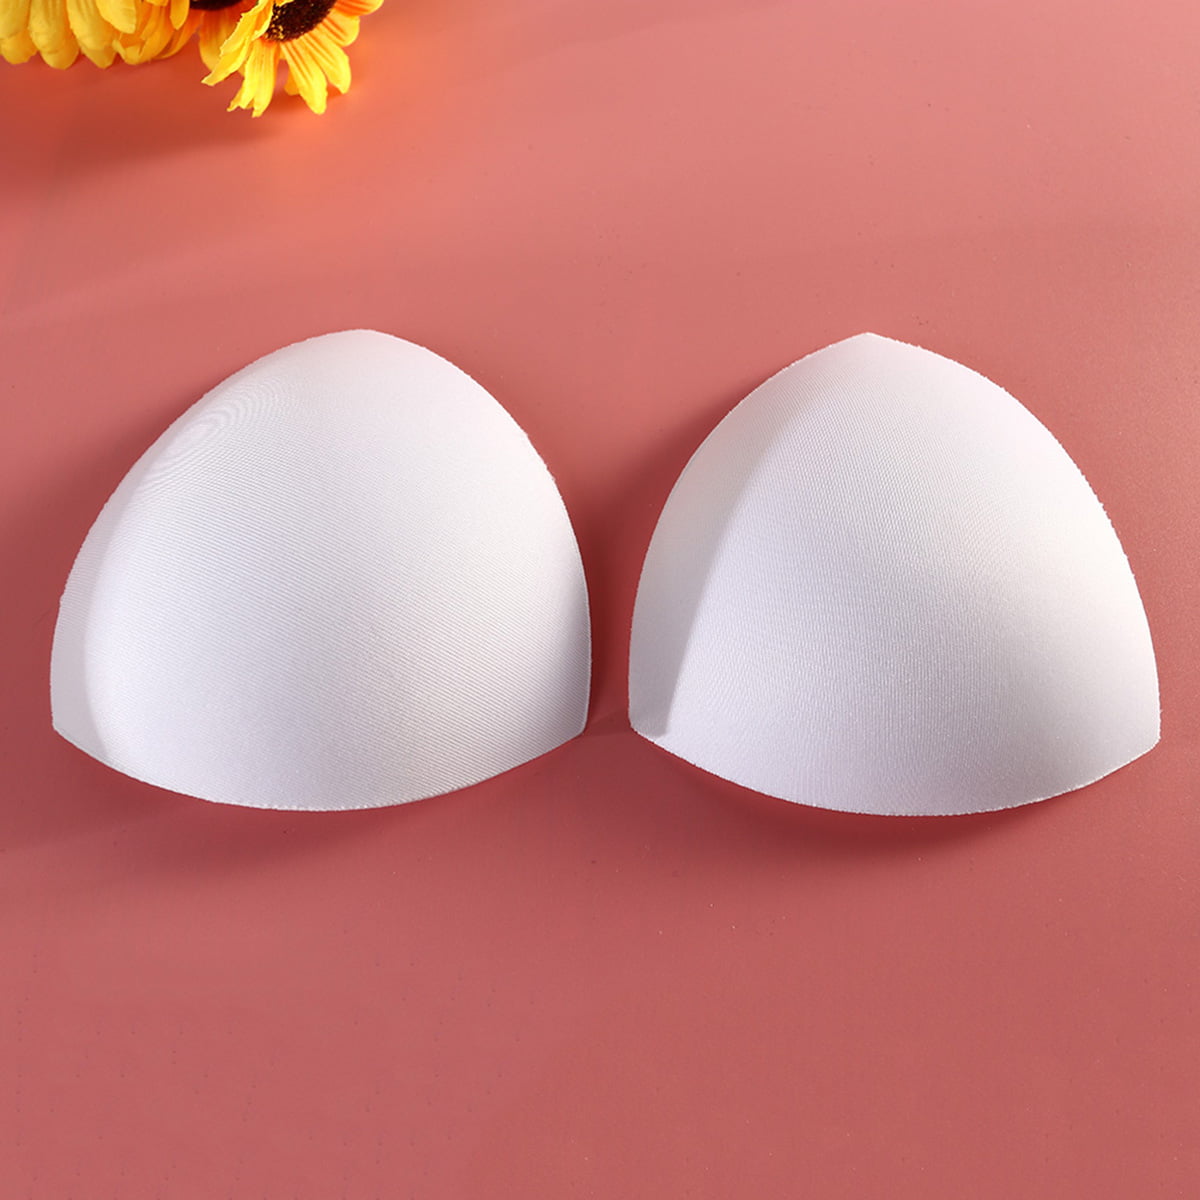 Buy 3 Pairs Bra Pads Inserts Bra Cups Inserts Removable Breast Enhancers  Inserts for Women Bikini Swimsuit Sport TopsWhite at Ubuy Pakistan